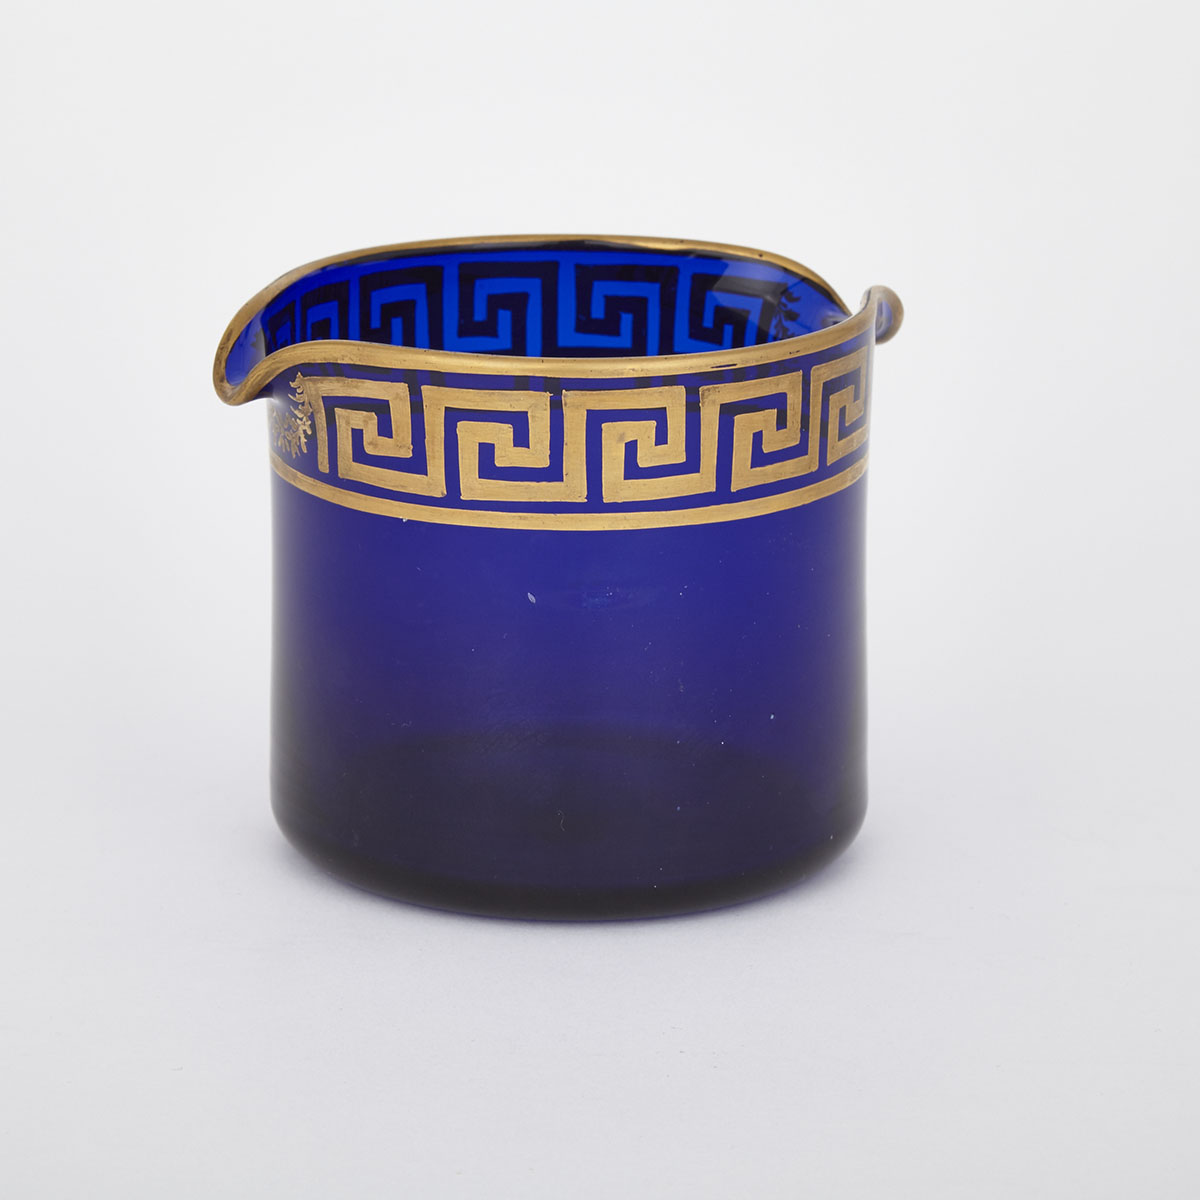 Bristol Gilt Decorated Blue Glass Wine Rinser, Isaac Jacobs, c.1805